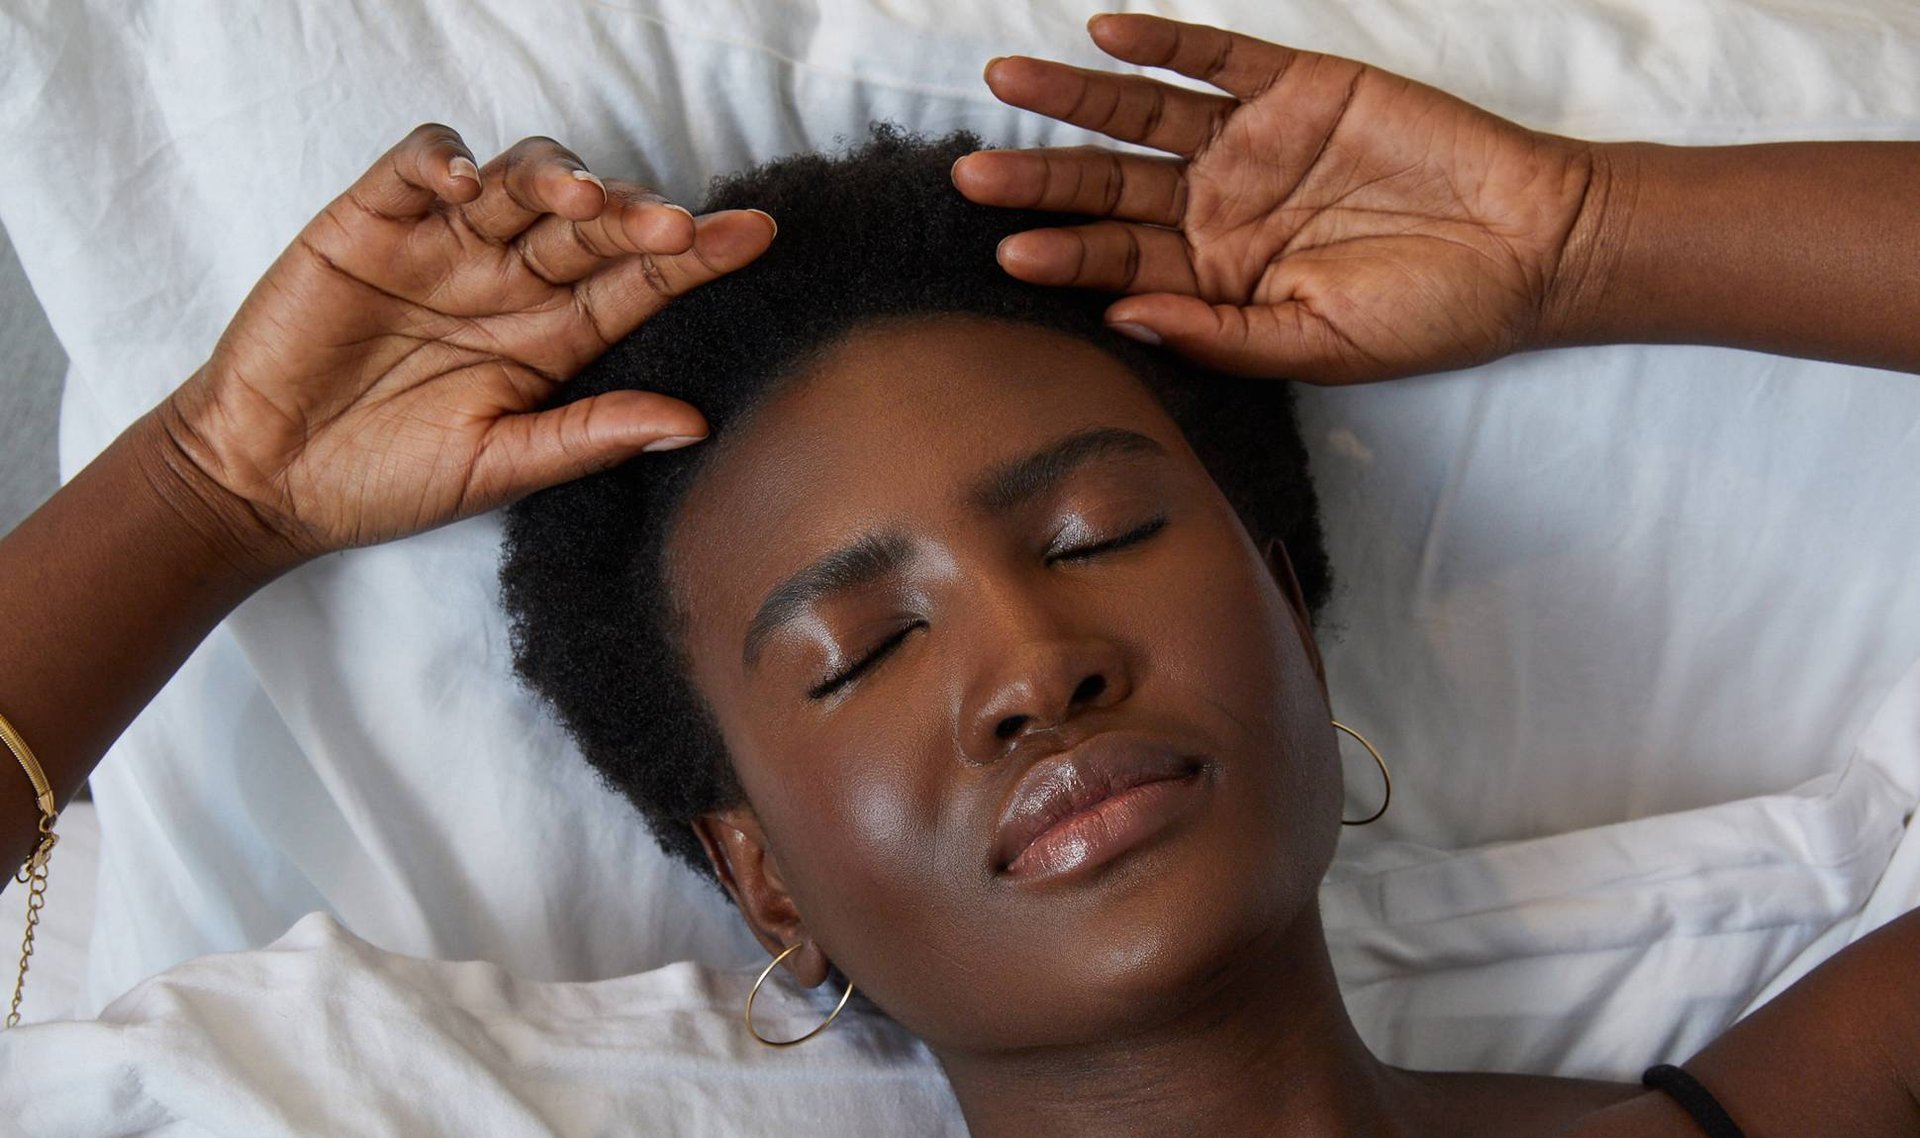 6 Products That Work Wonders While You Sleep